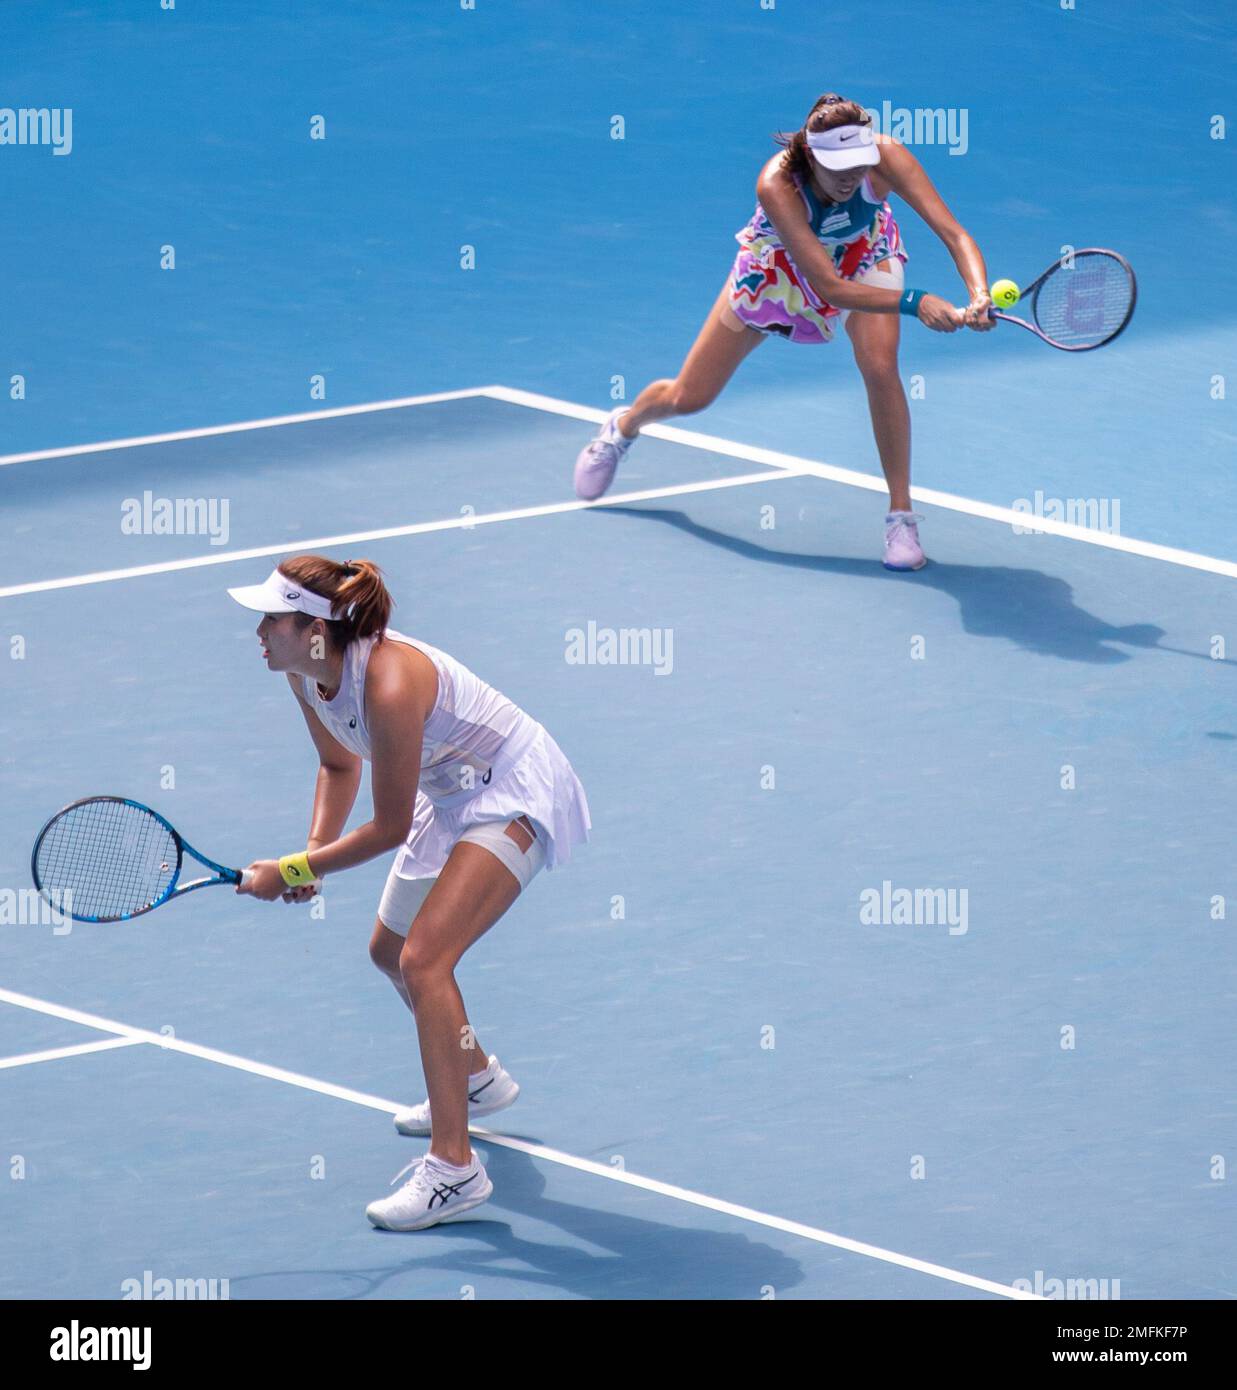 Melbourne, Australia. 25th Jan, 2023. Yang Zhaoxuan (L) of China/Chan Hao-Ching of Chinese Taipei compete during the women's doubles quarterfinal against Jessica Pegula/Coco Gauff of the United States at Australian Open at Melbourne Park in Melbourne, Australia, Jan. 25, 2023. Credit: Hu Jingchen/Xinhua/Alamy Live News Stock Photo